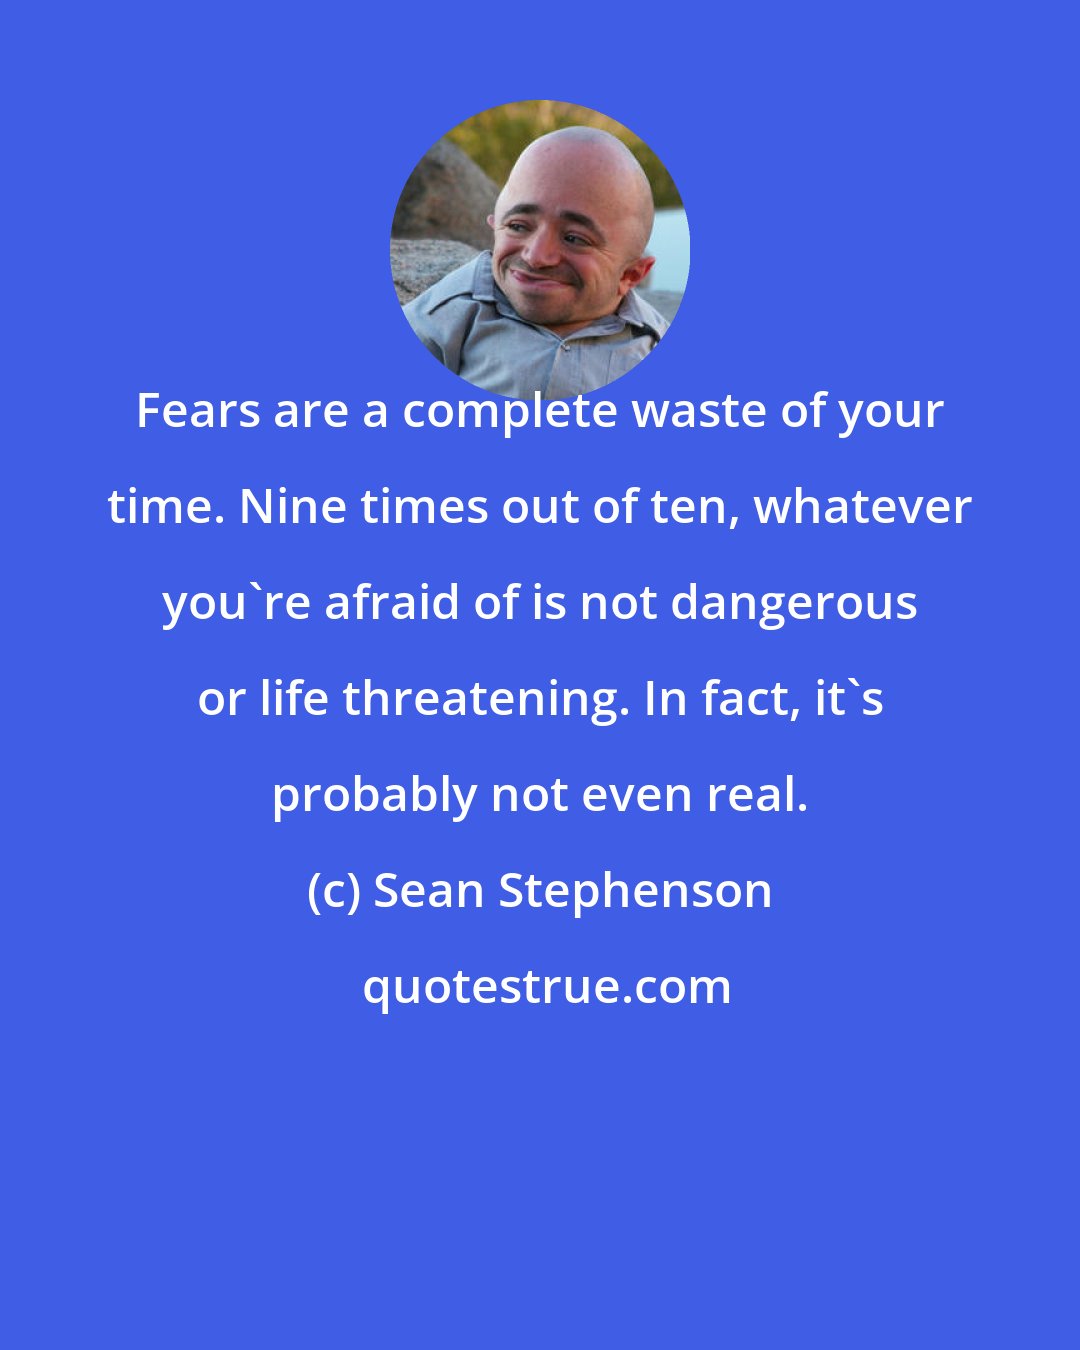 Sean Stephenson: Fears are a complete waste of your time. Nine times out of ten, whatever you're afraid of is not dangerous or life threatening. In fact, it's probably not even real.